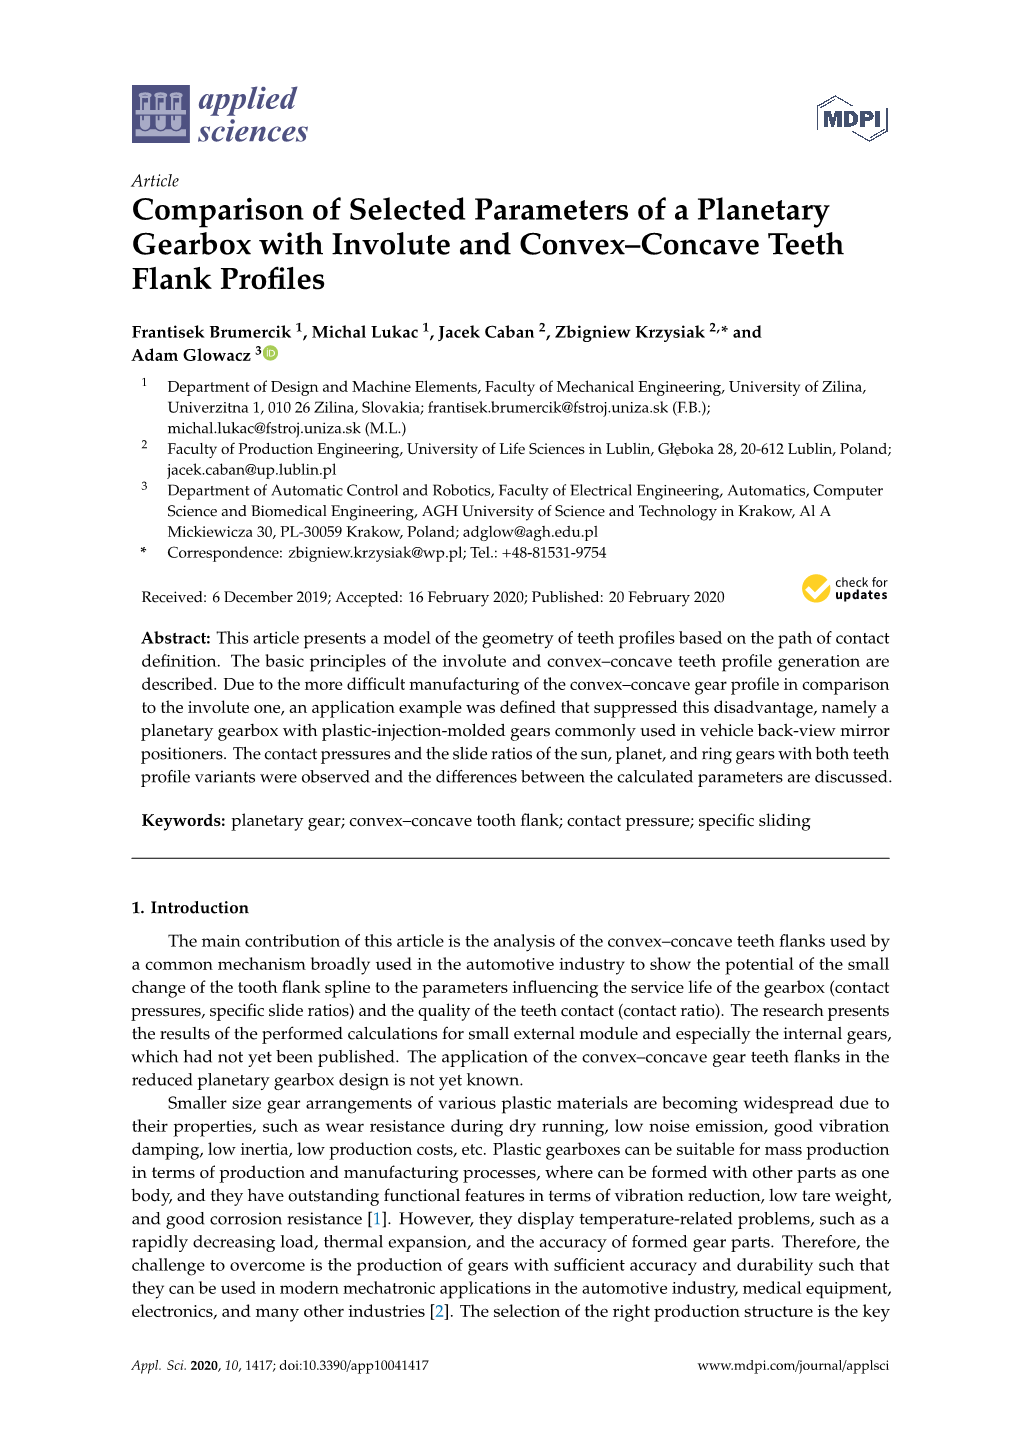 Comparison of Selected Parameters of a Planetary Gearbox with Involute and Convex–Concave Teeth Flank Proﬁles